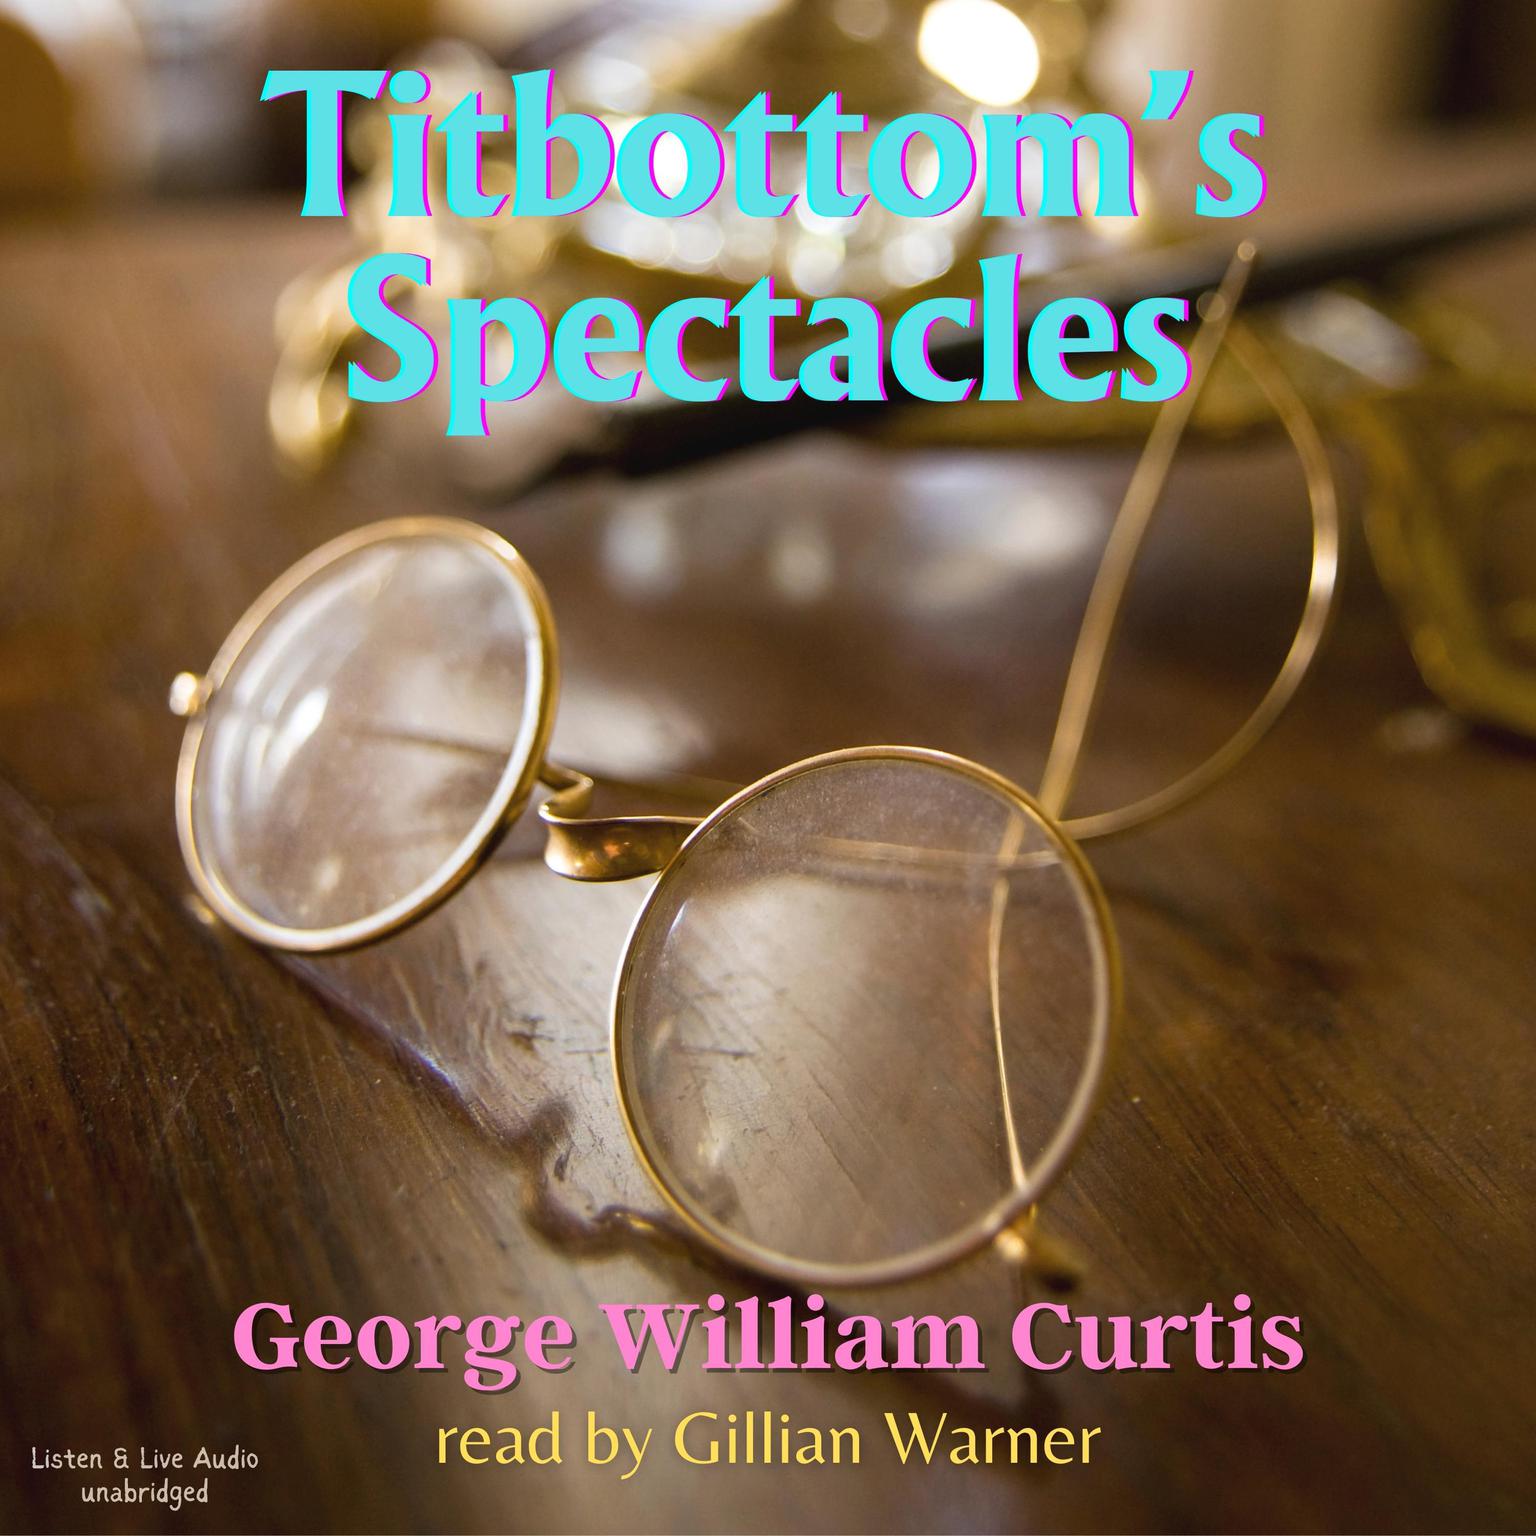 Titbottom’s Spectacles Audiobook, by George William Curtis